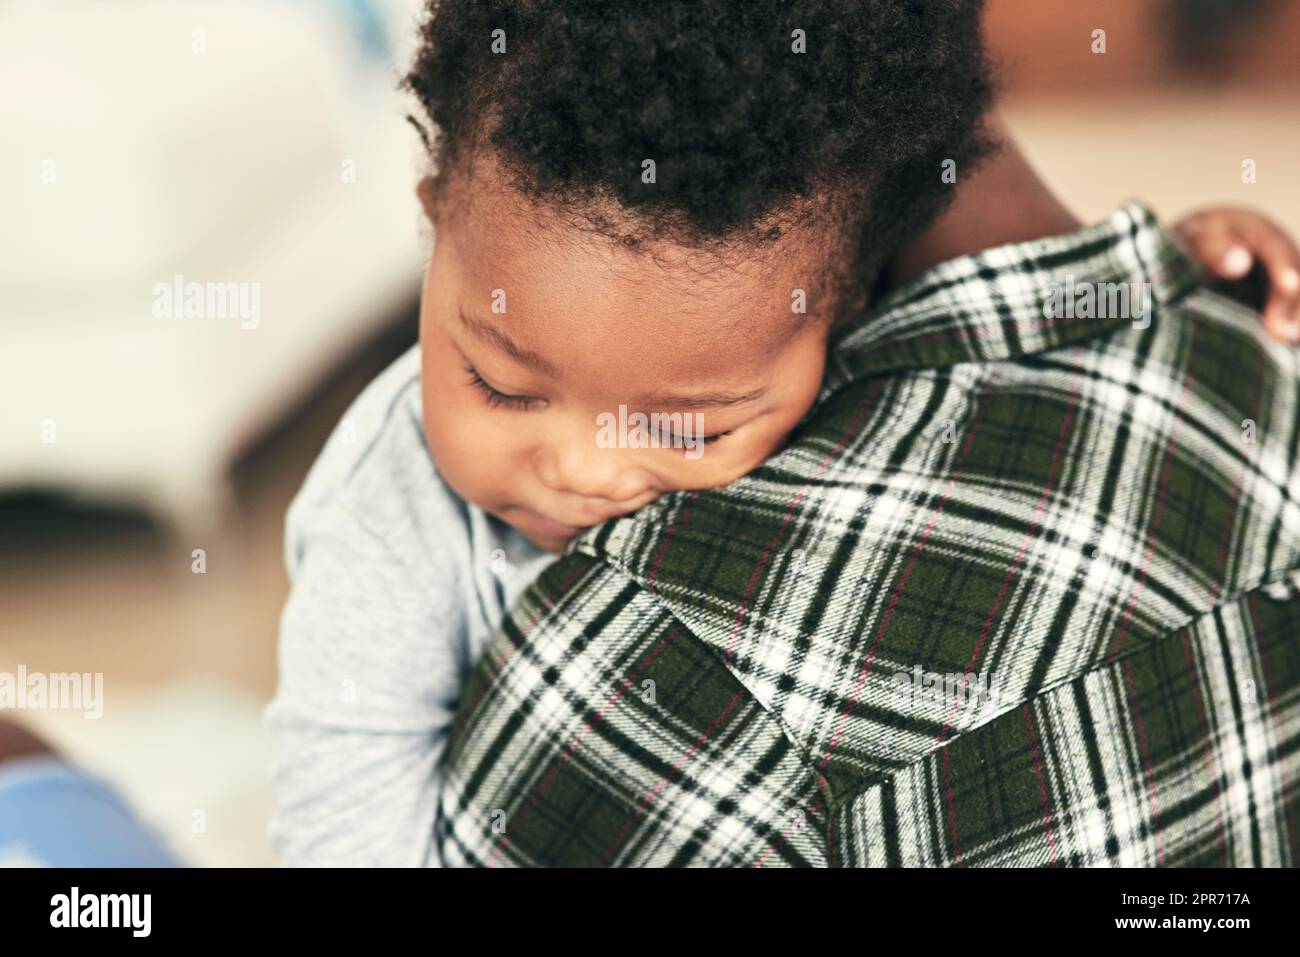 Sleep solves everything. Shot of an adorable baby boy falling asleep on his mothers shoulders. Stock Photo